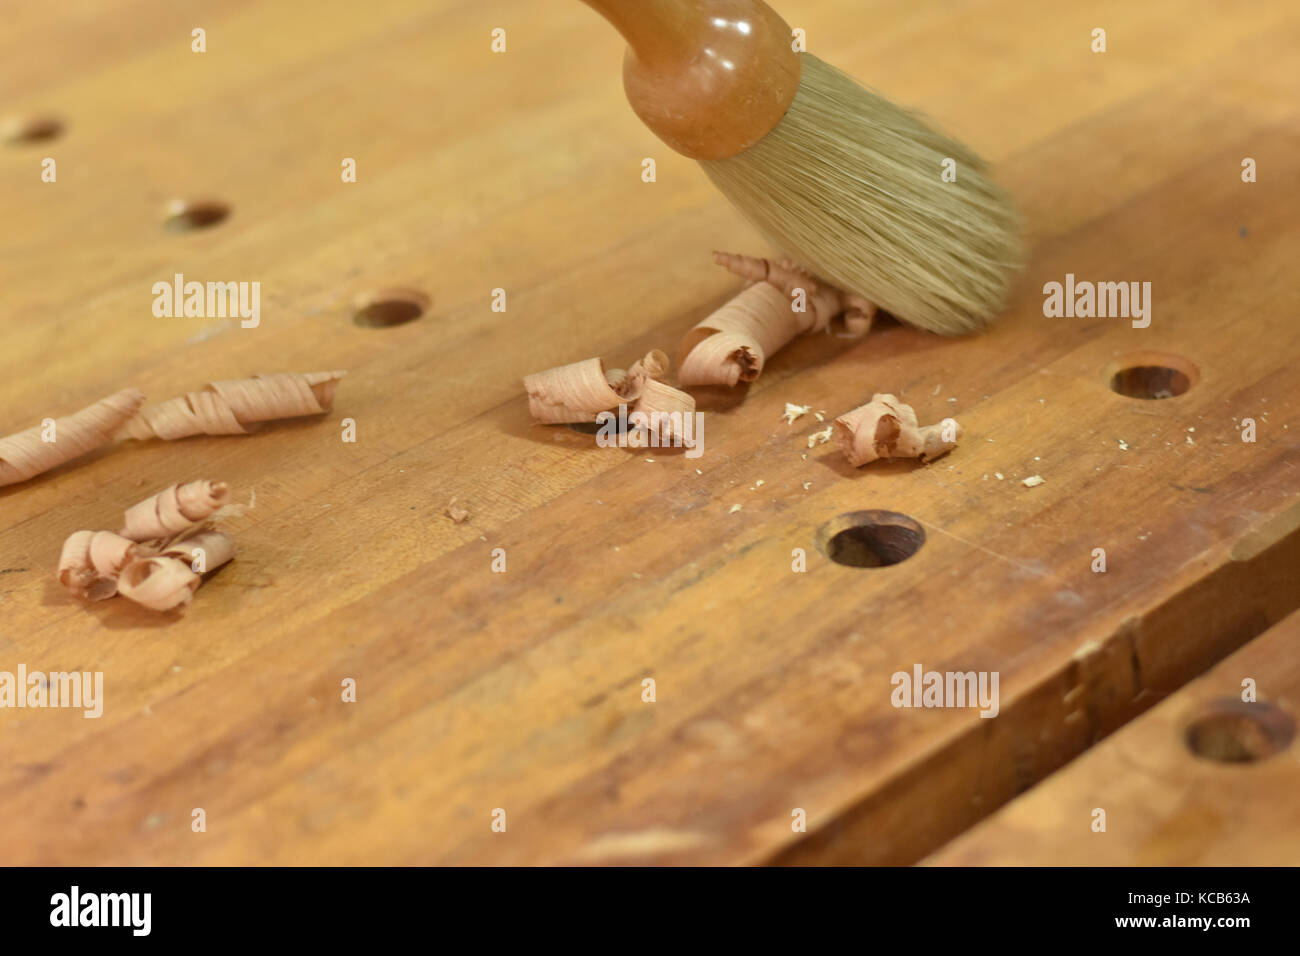 Removing wood shavings from a hard maple workbench with a dust brush. Stock Photo